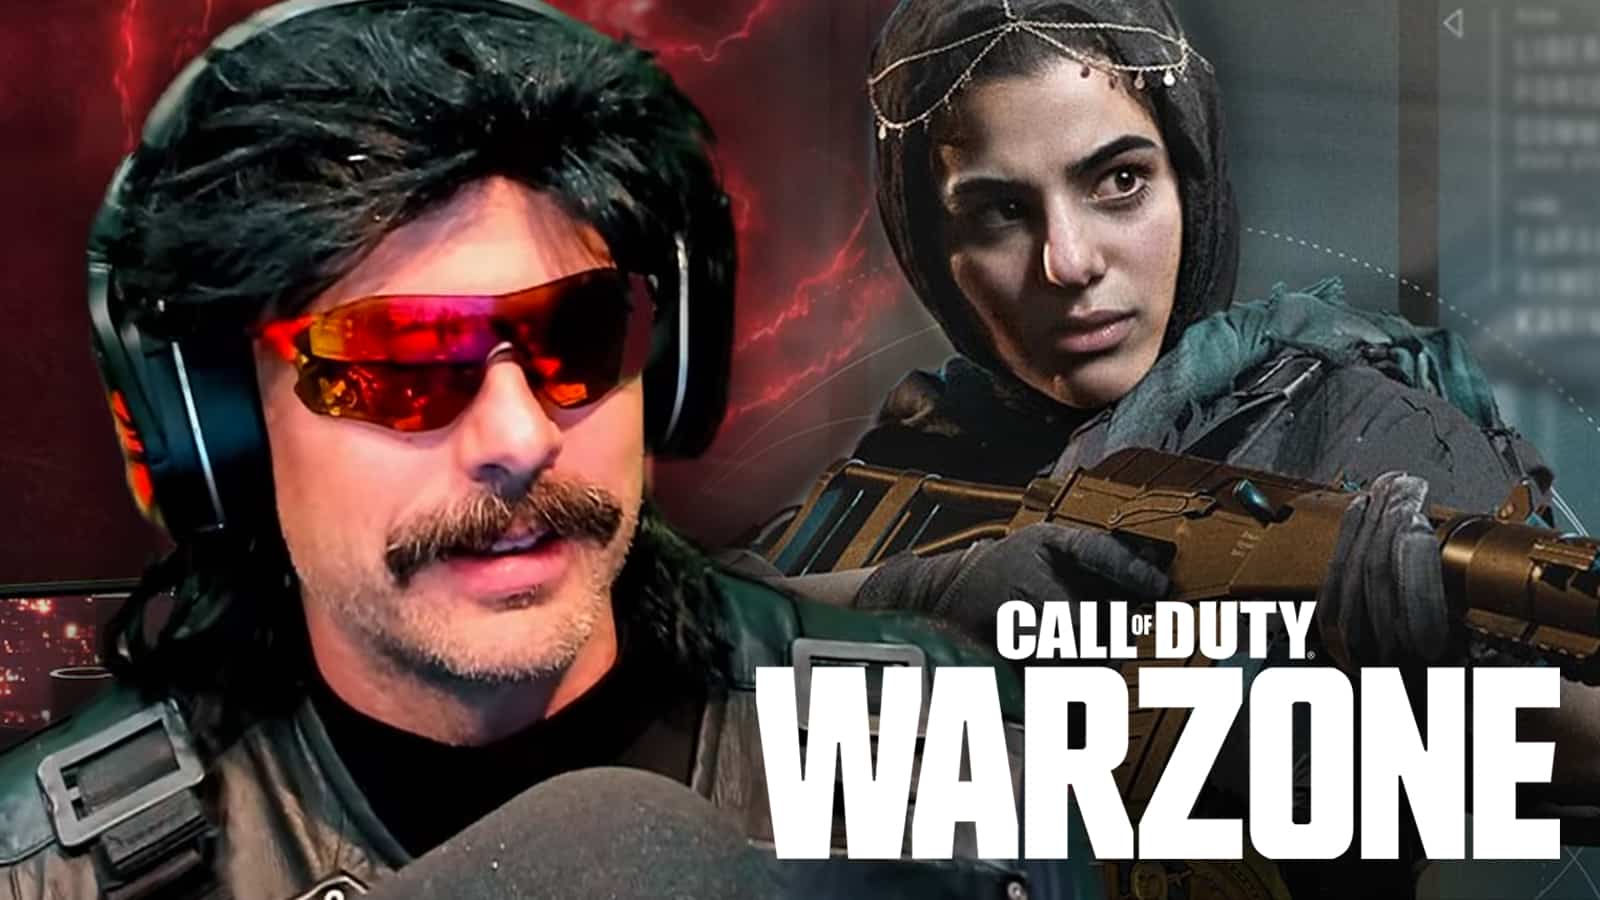 Dr Disrespect stares at Warzone.